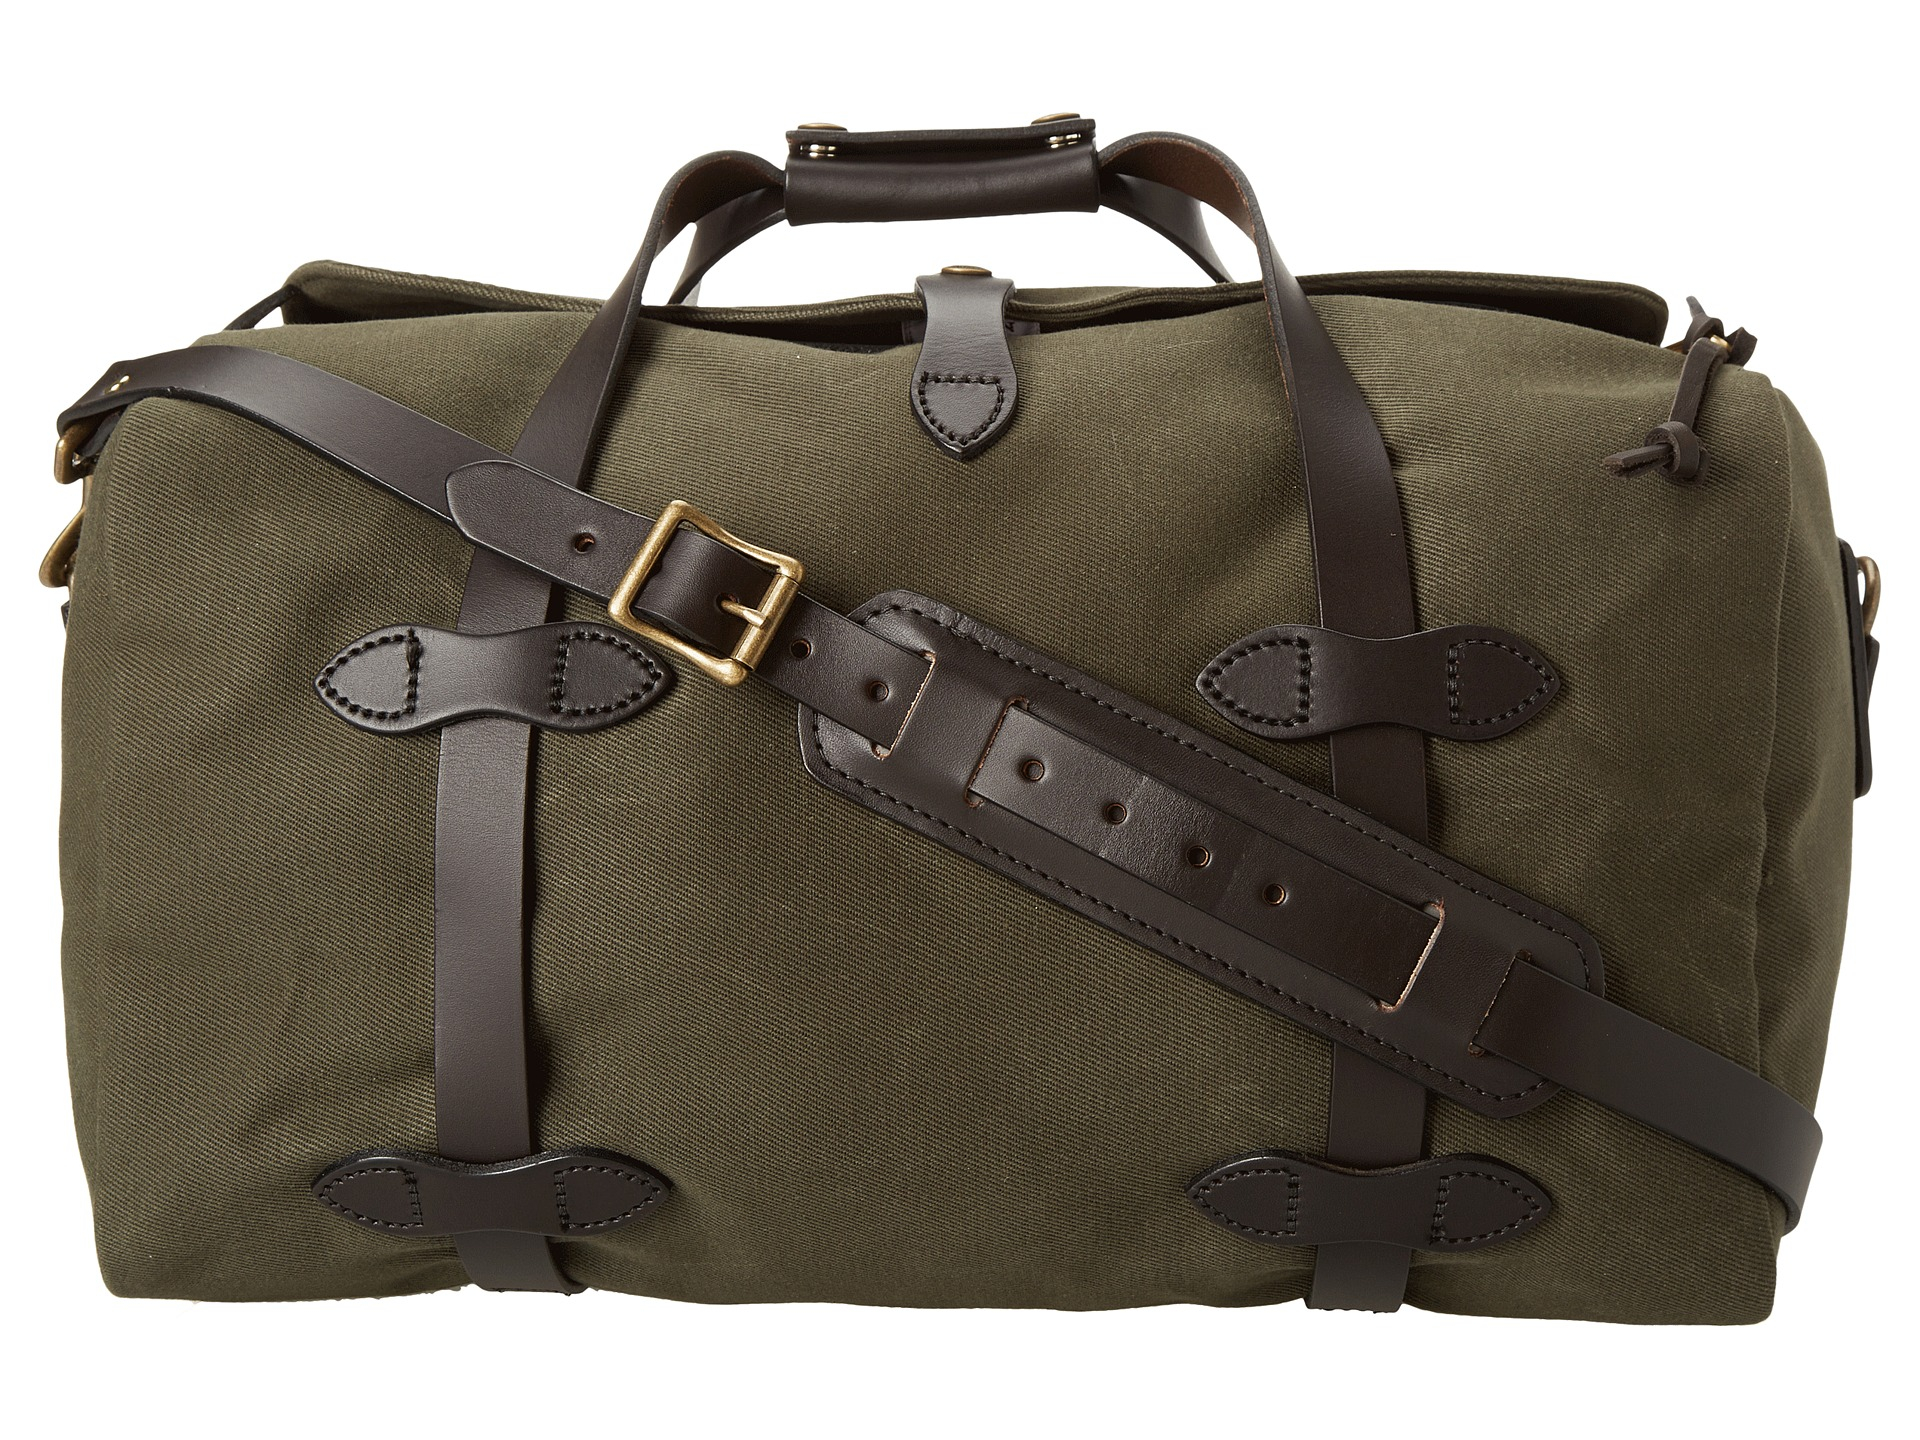 Lyst - Filson Small Duffle Bag in Green for Men